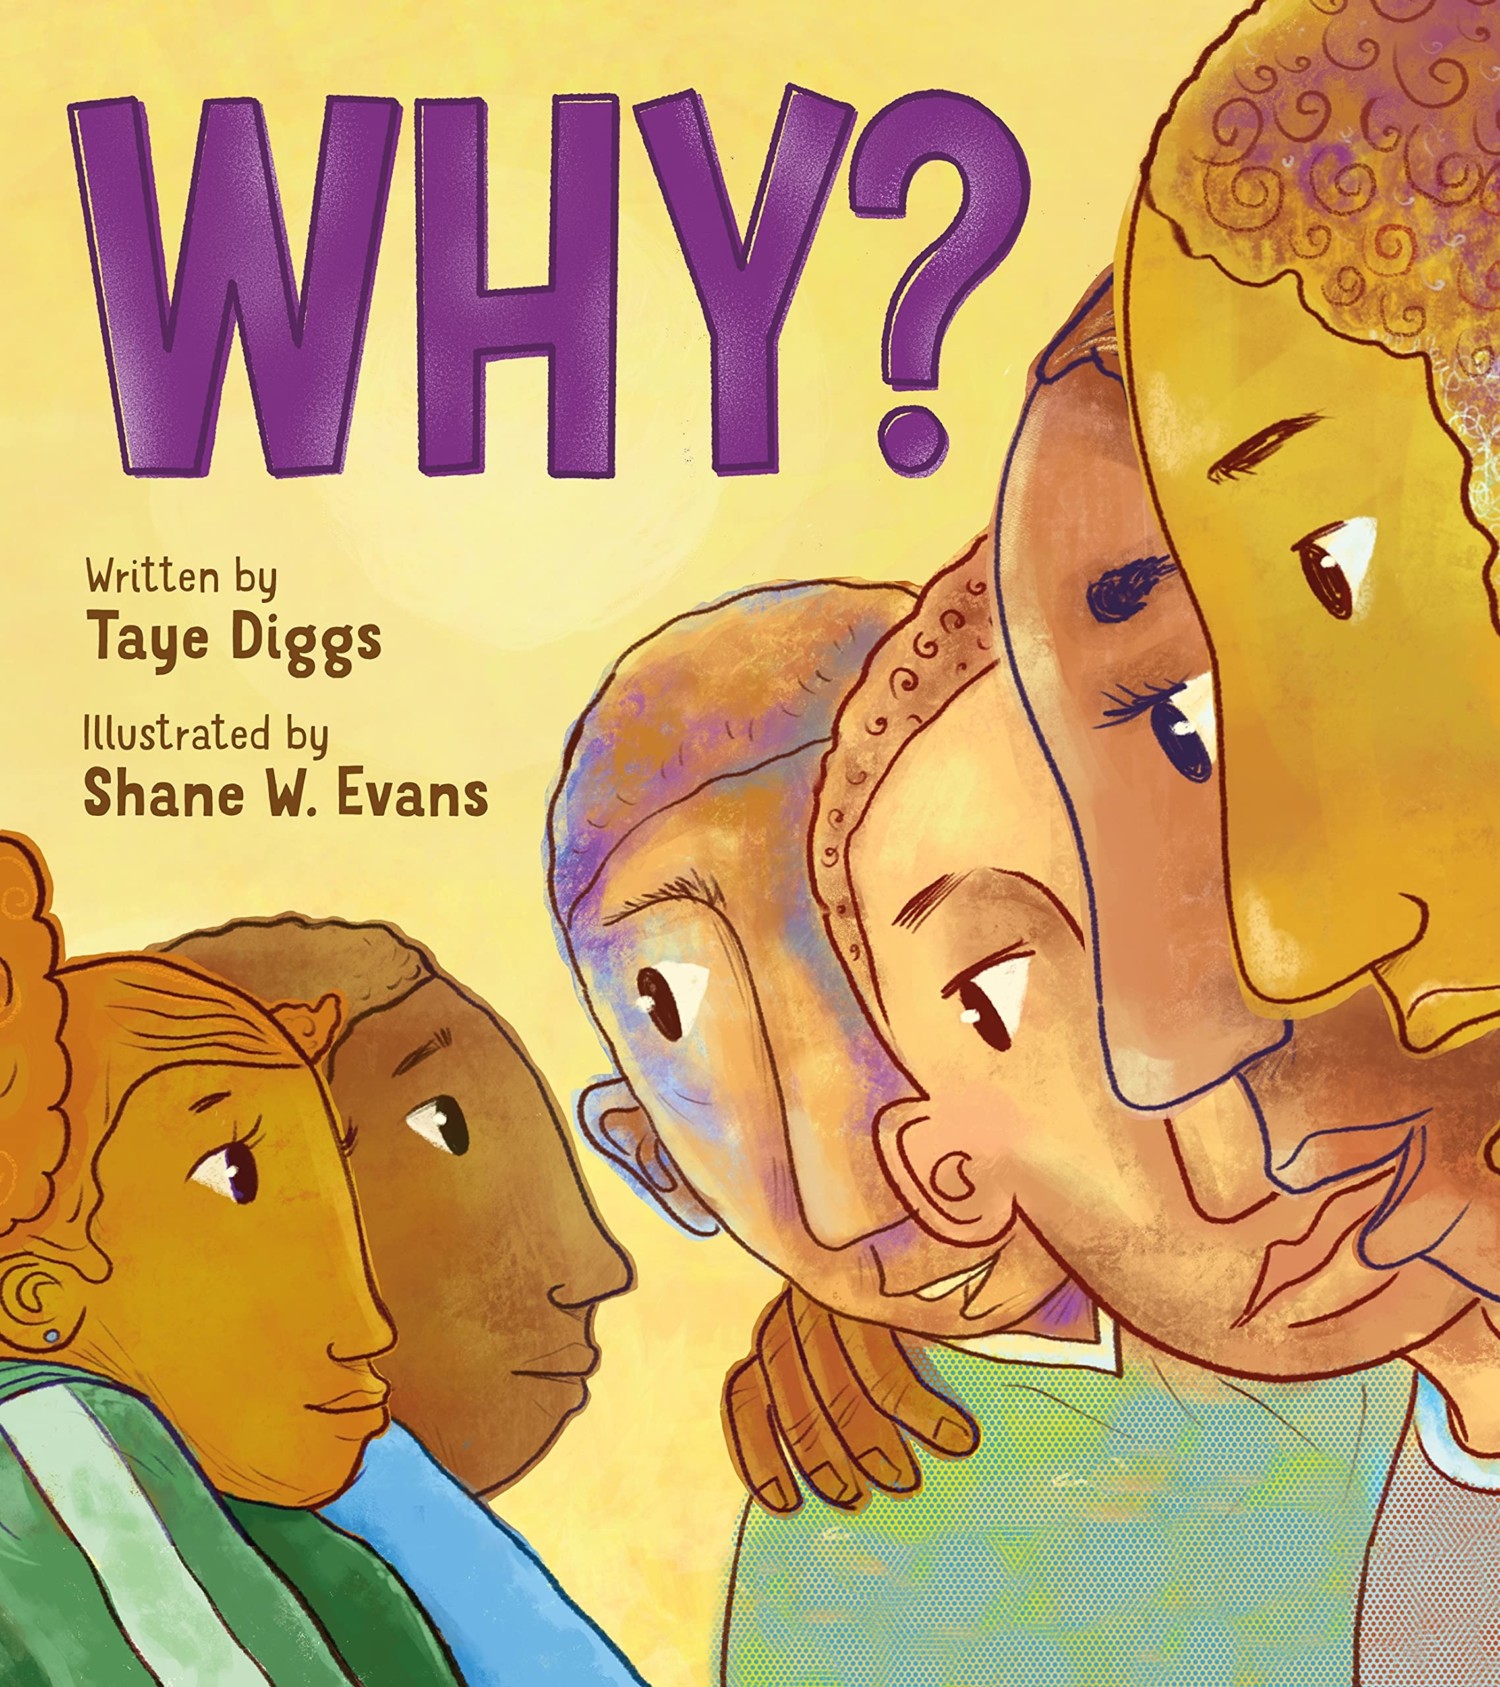 "Why?" book cover, by Taye Diggs